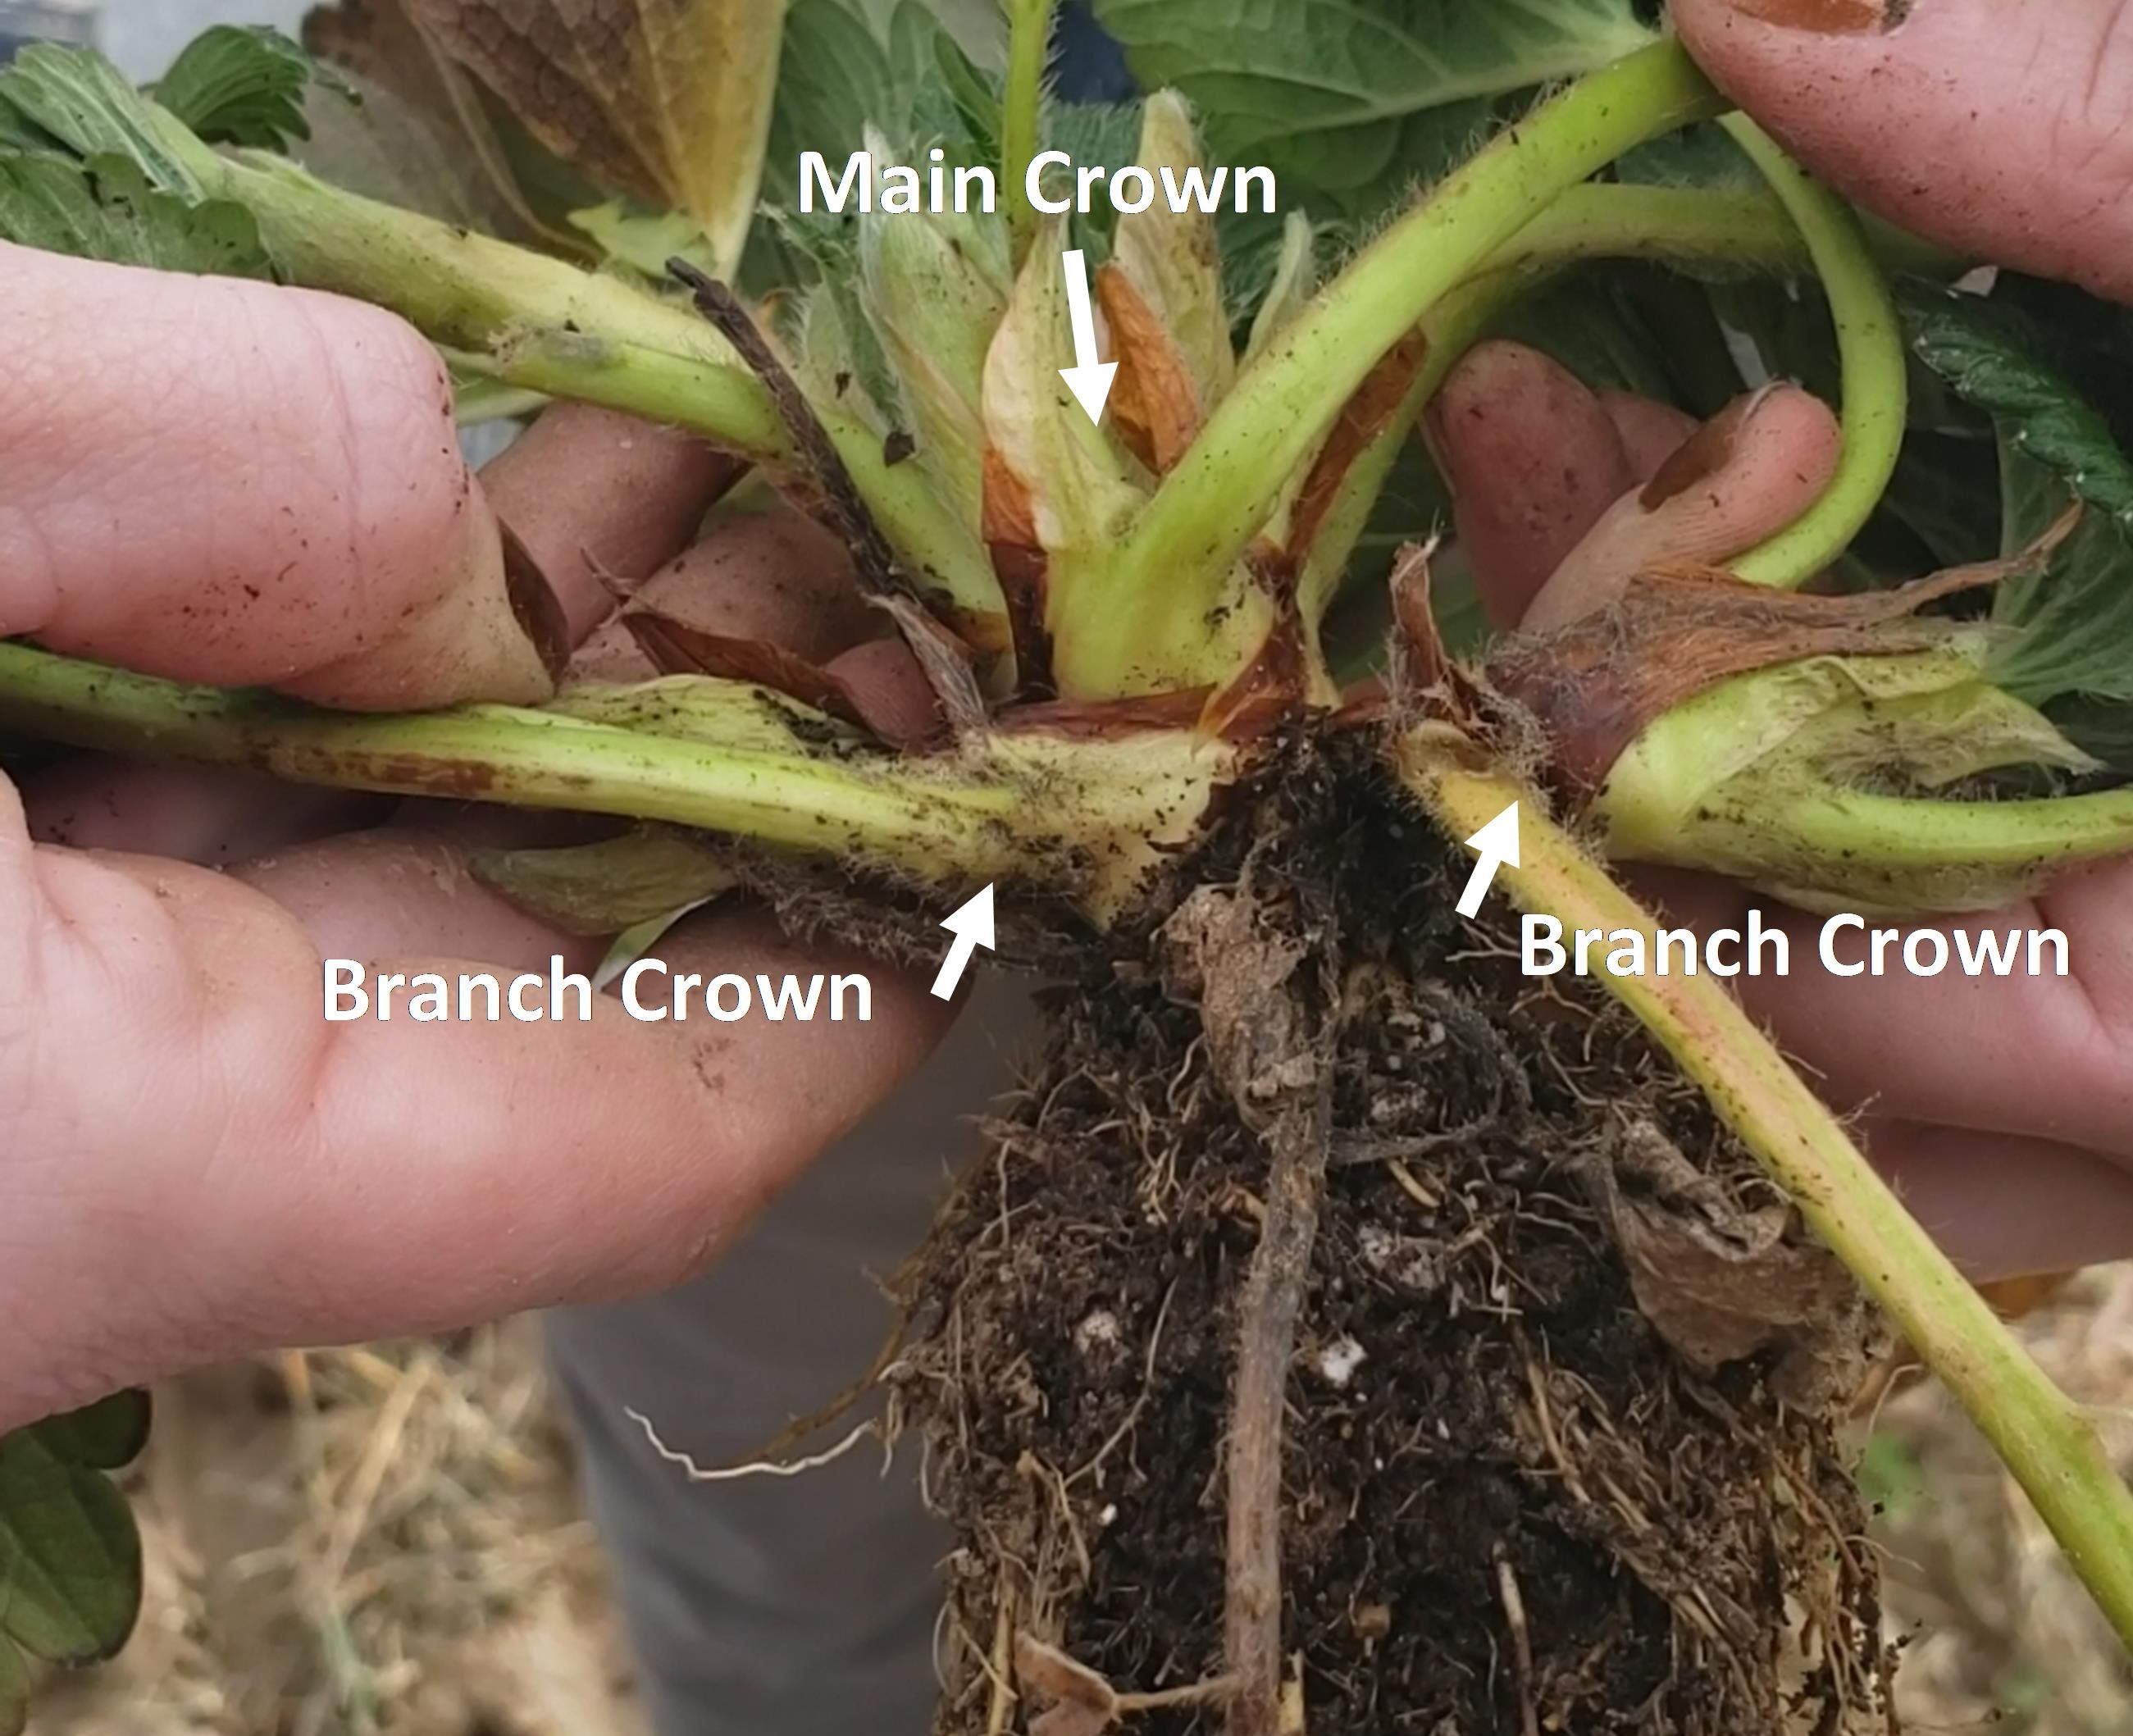 Image 3. Strawberry plant dug up with main and branch crowns separated. Source: Amanda McWhirt